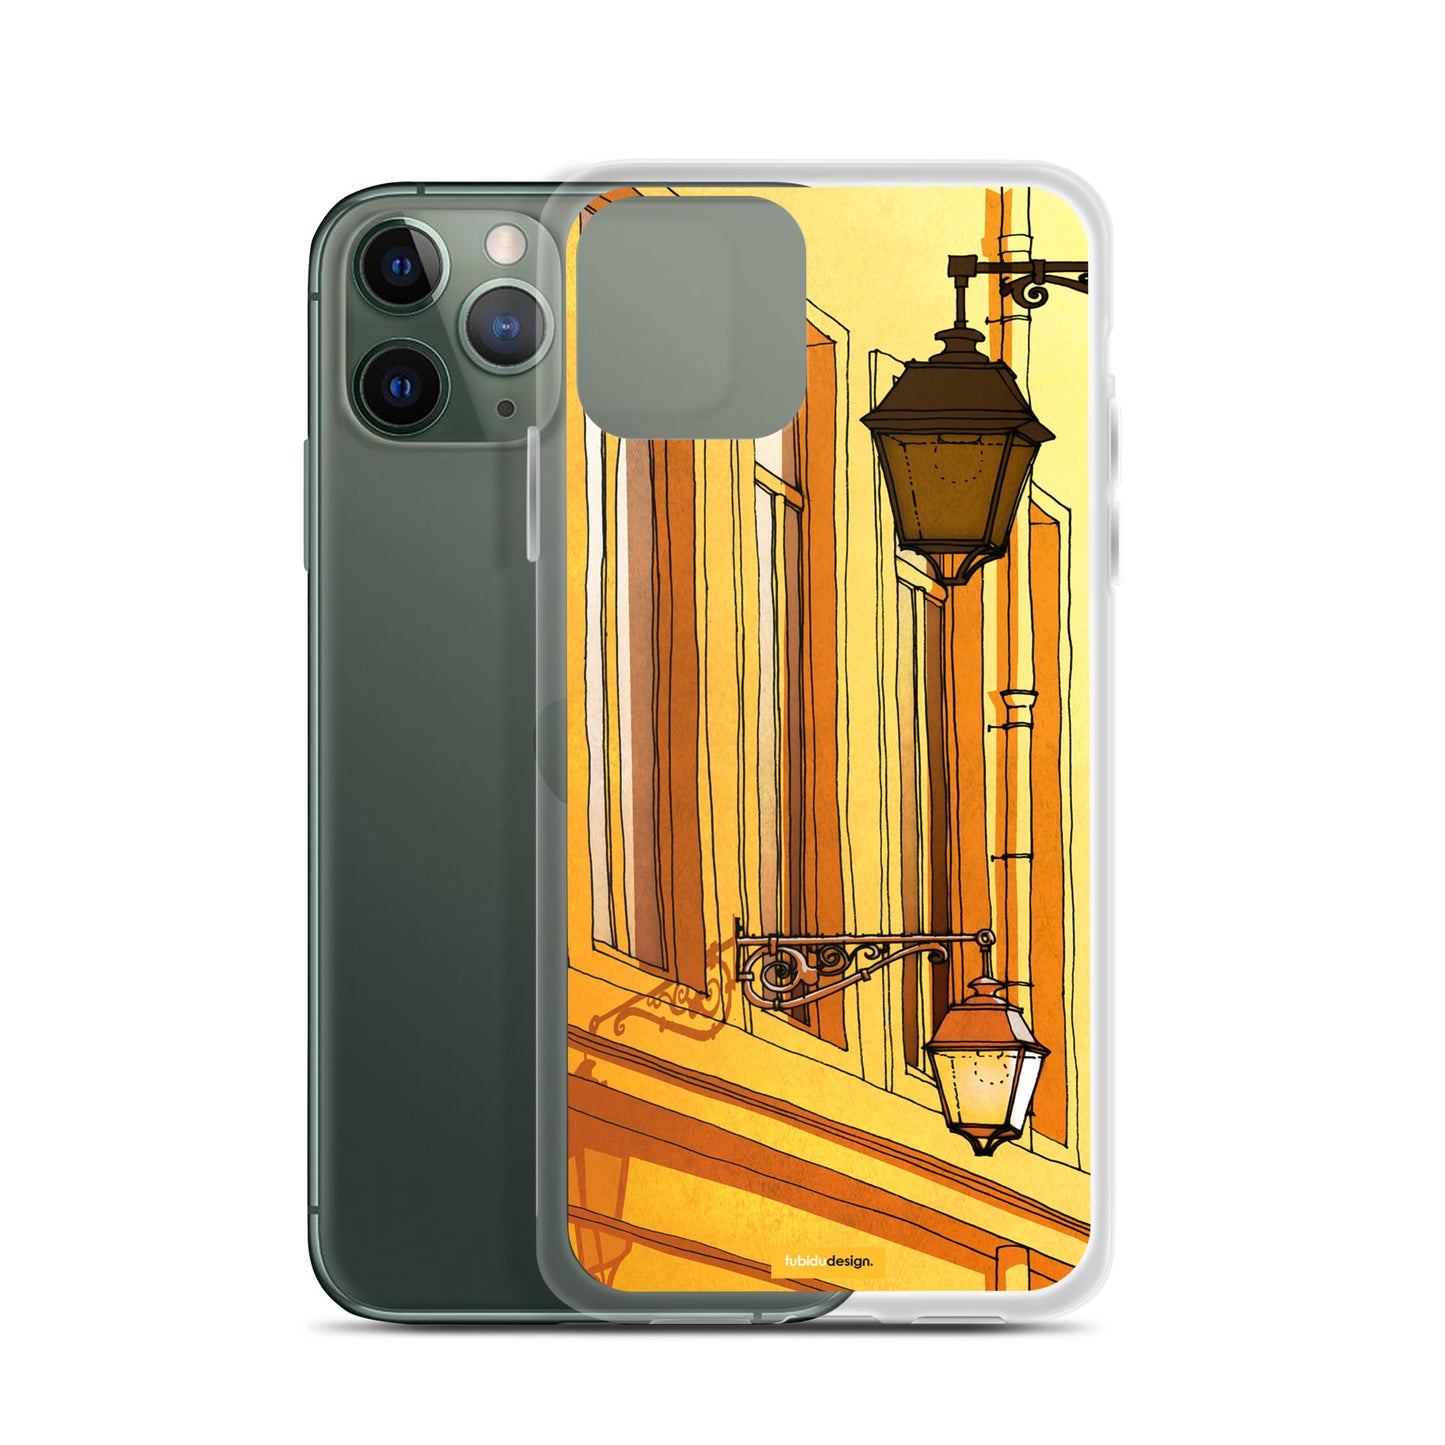 Backlight - Illustrated iPhone Case